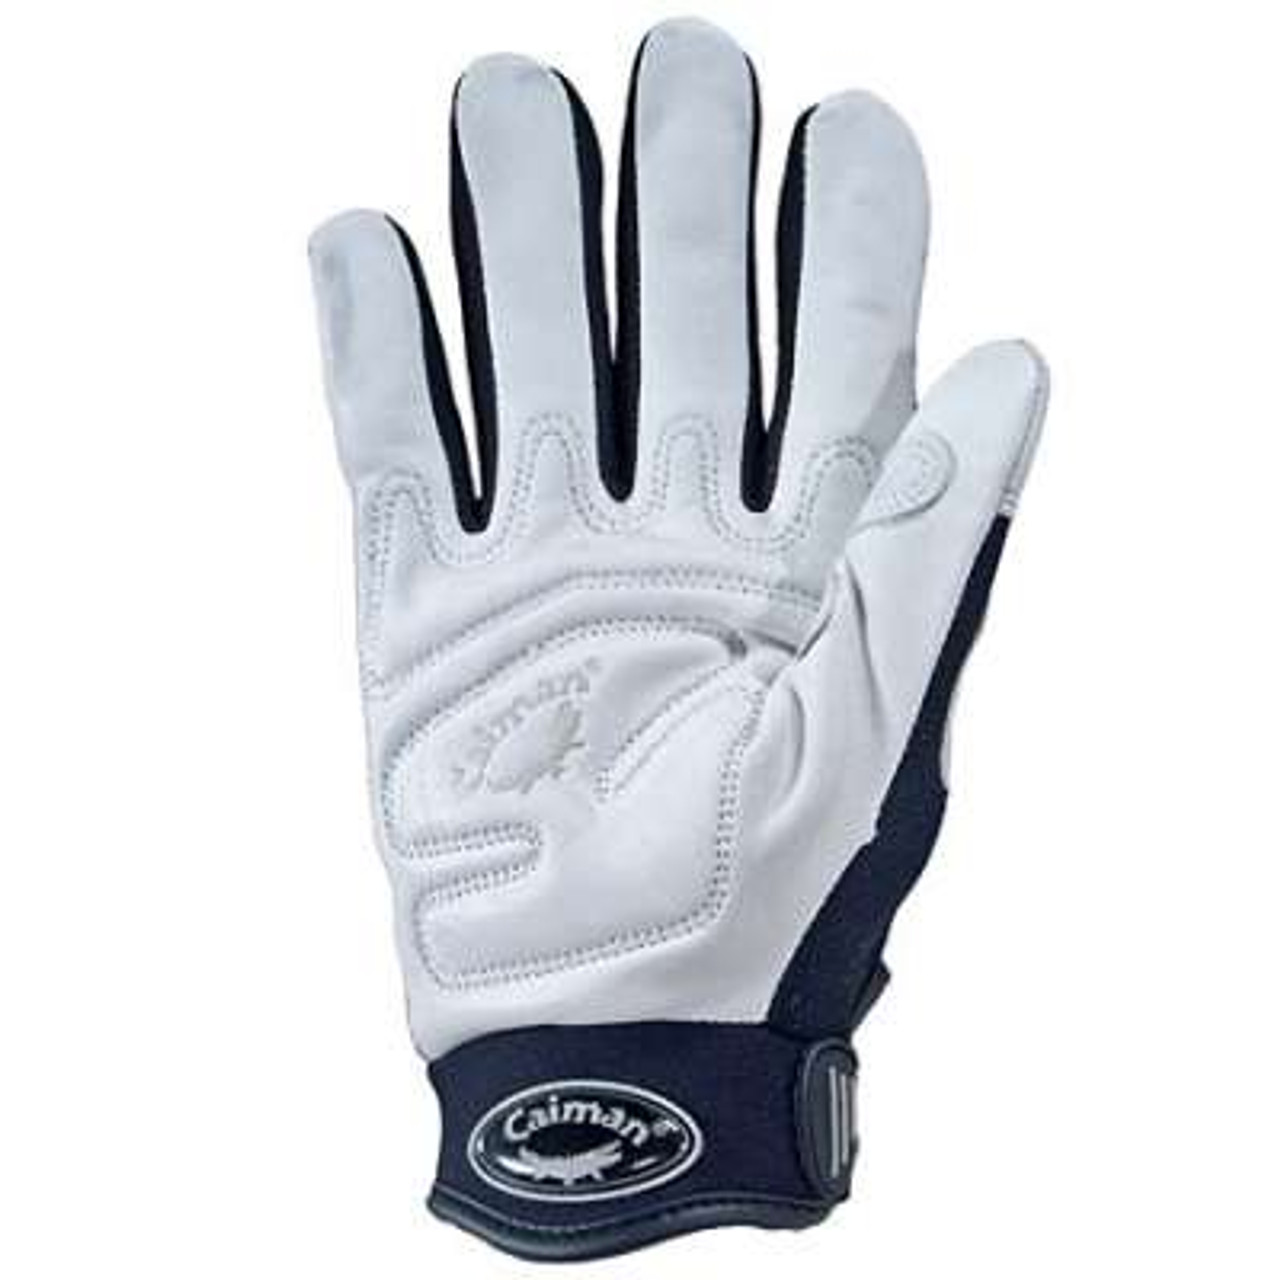 2955 - Goat Grain Padded Palm Knuckle Protection Mechanics Gloves